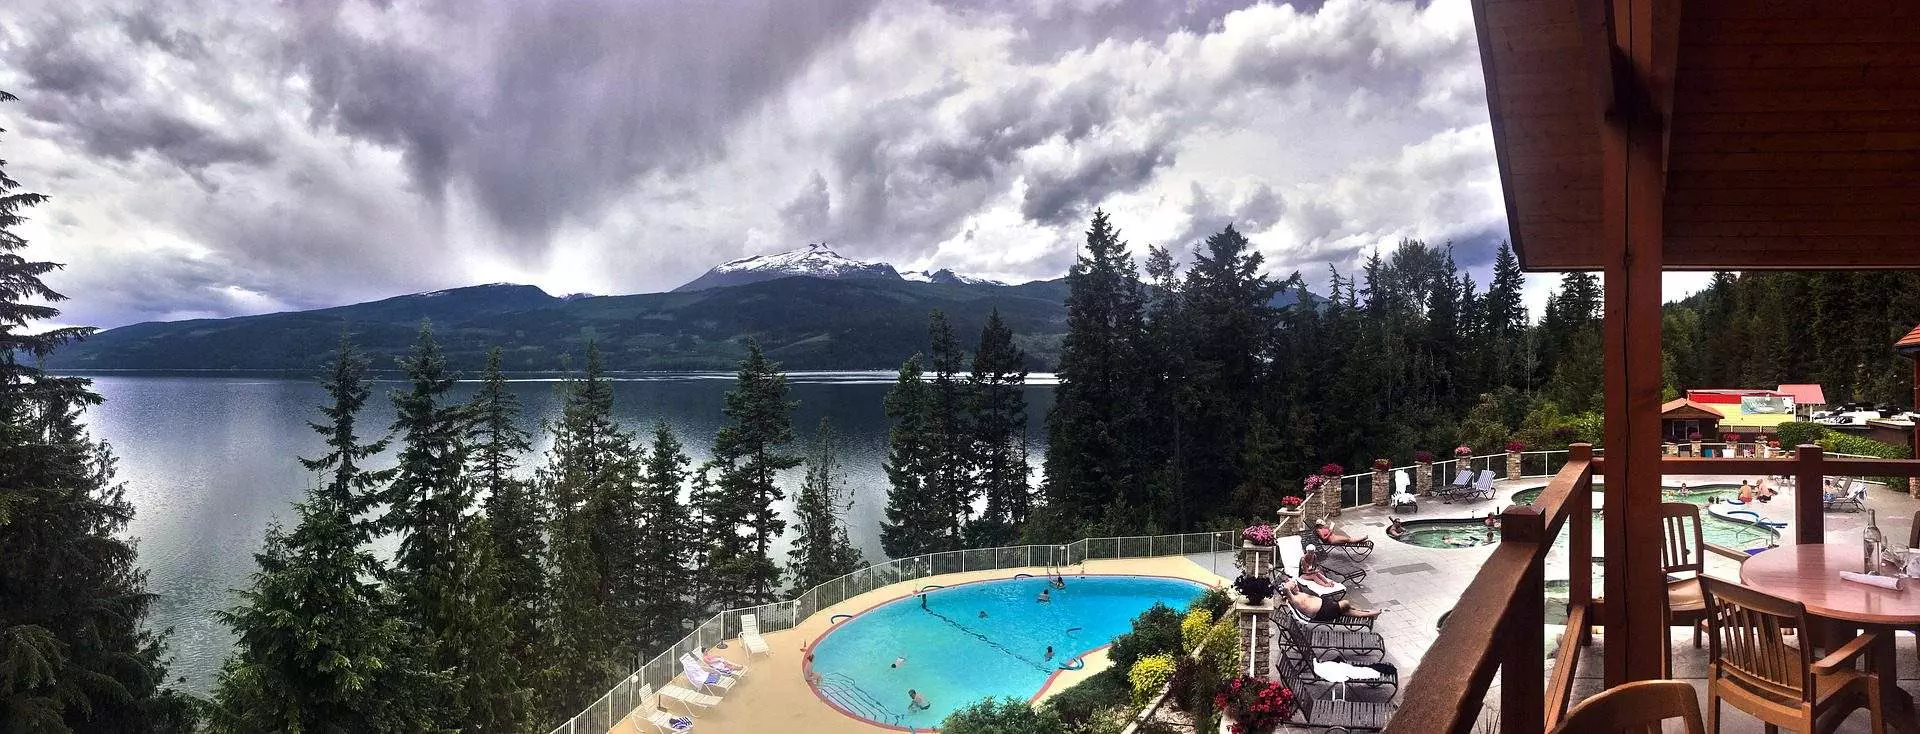 Vancouver hot springs, Halcyon Hot Springs